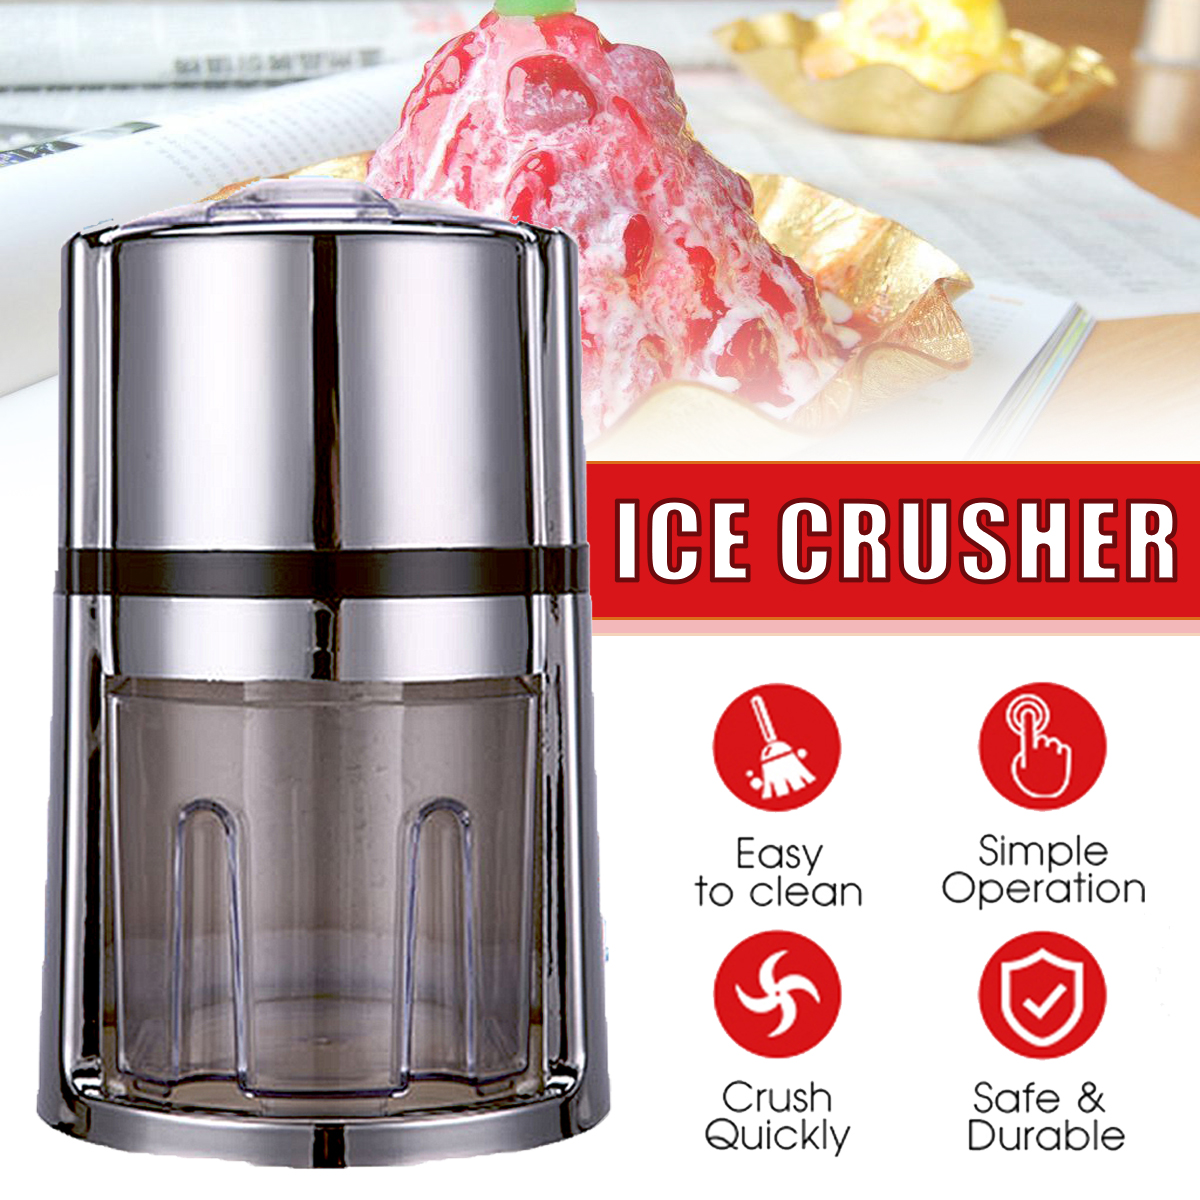 15L-Portable-Manual-Ice-Crusher-Ice-Maker-Snow-Cone-Machine-Ice-ShaverStainless-Steel-Ice-Cream-Scoo-1928427-2